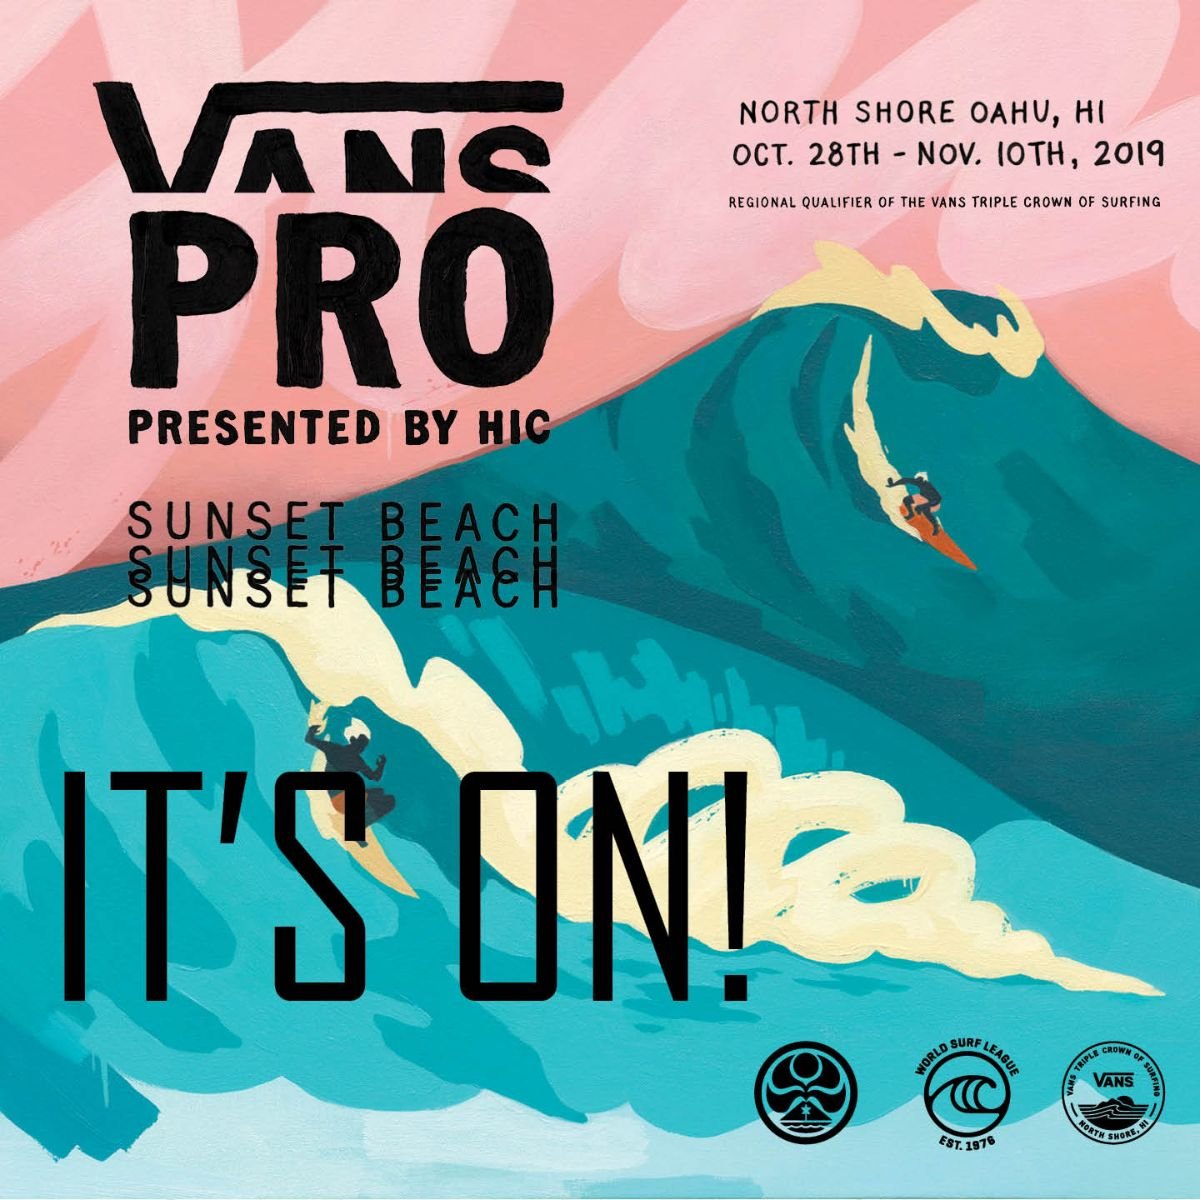 HIC Surf: Vans Pro Presented by HIC is 